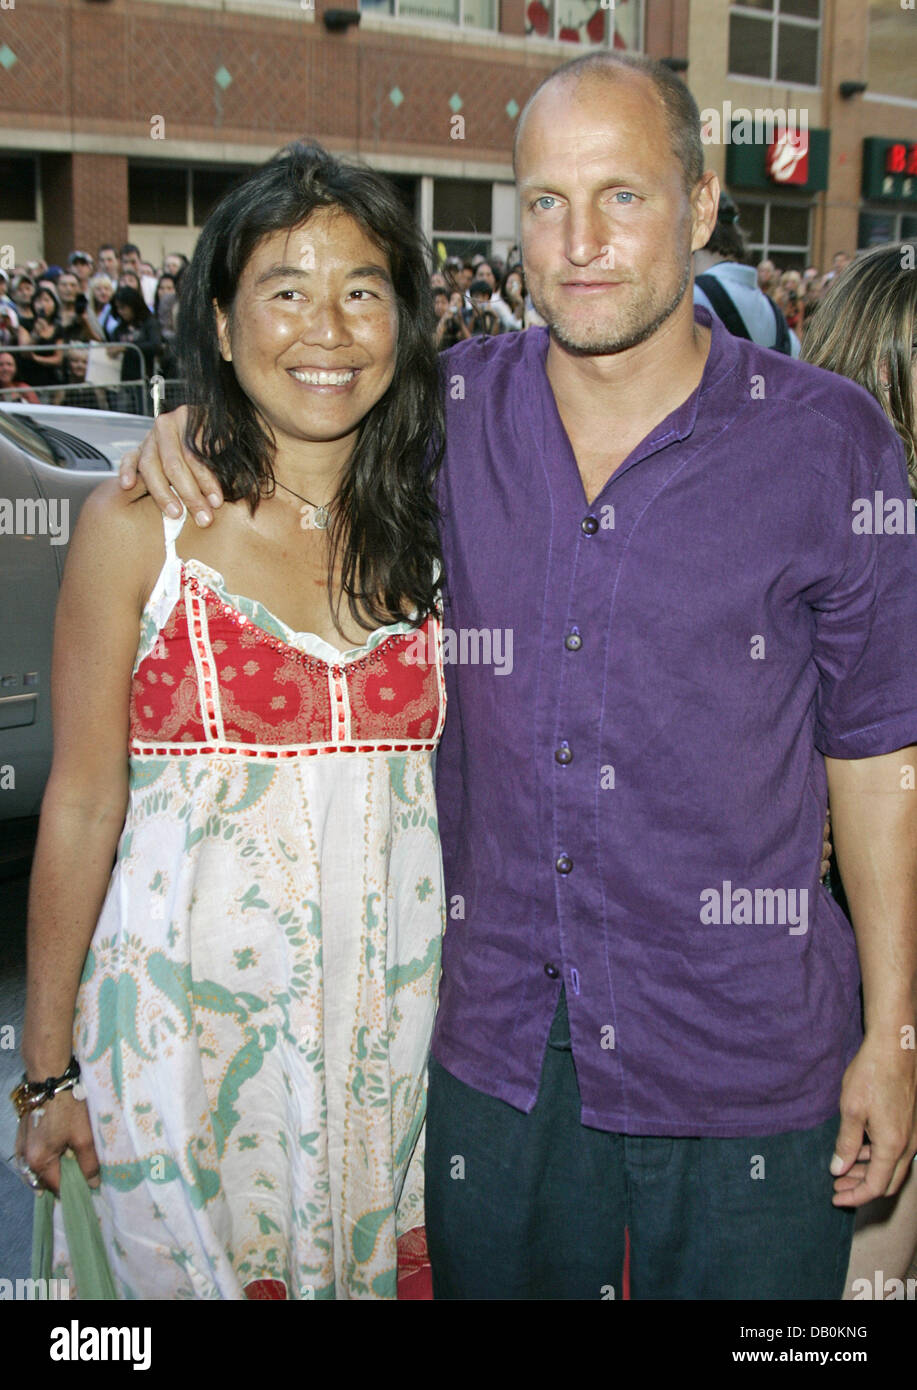 Actor Woody Harrelson and his wife Laura Louie arrive at the premiere of the film 'Battle In Seattle' at the International Film Festival in Toronto, Canada, 08 September 2007. Photo: Hubert Boesl Stock Photo